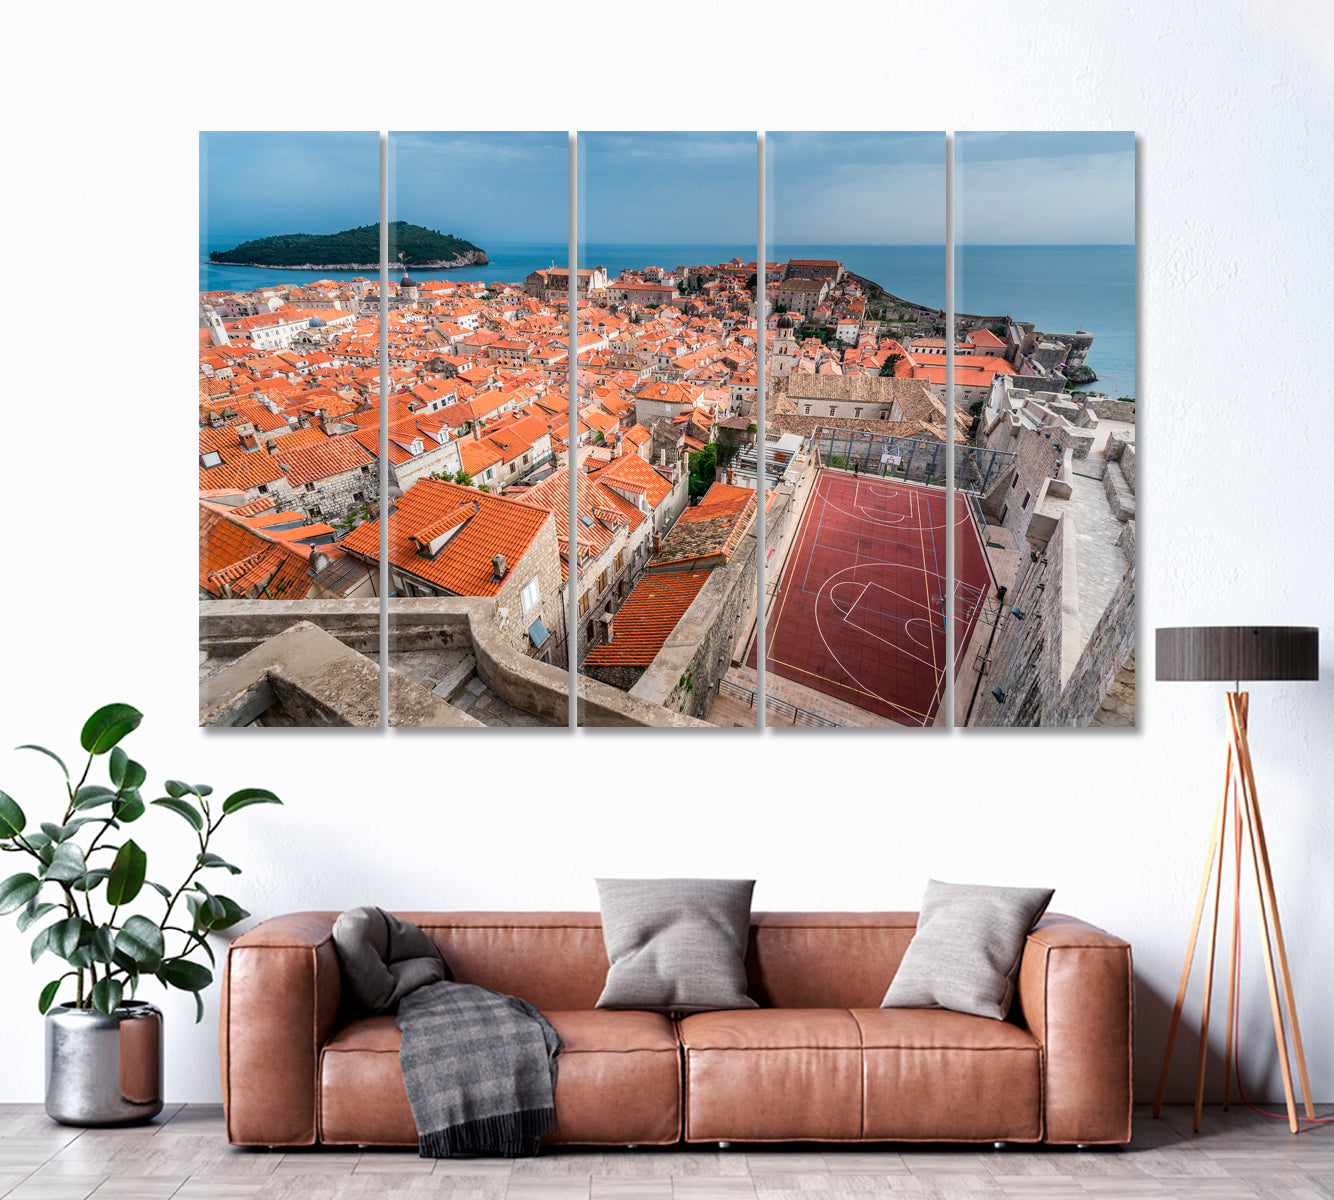 Basketball Court in Dubrovnik Croatia Canvas Print ArtLexy 5 Panels 36"x24" inches 